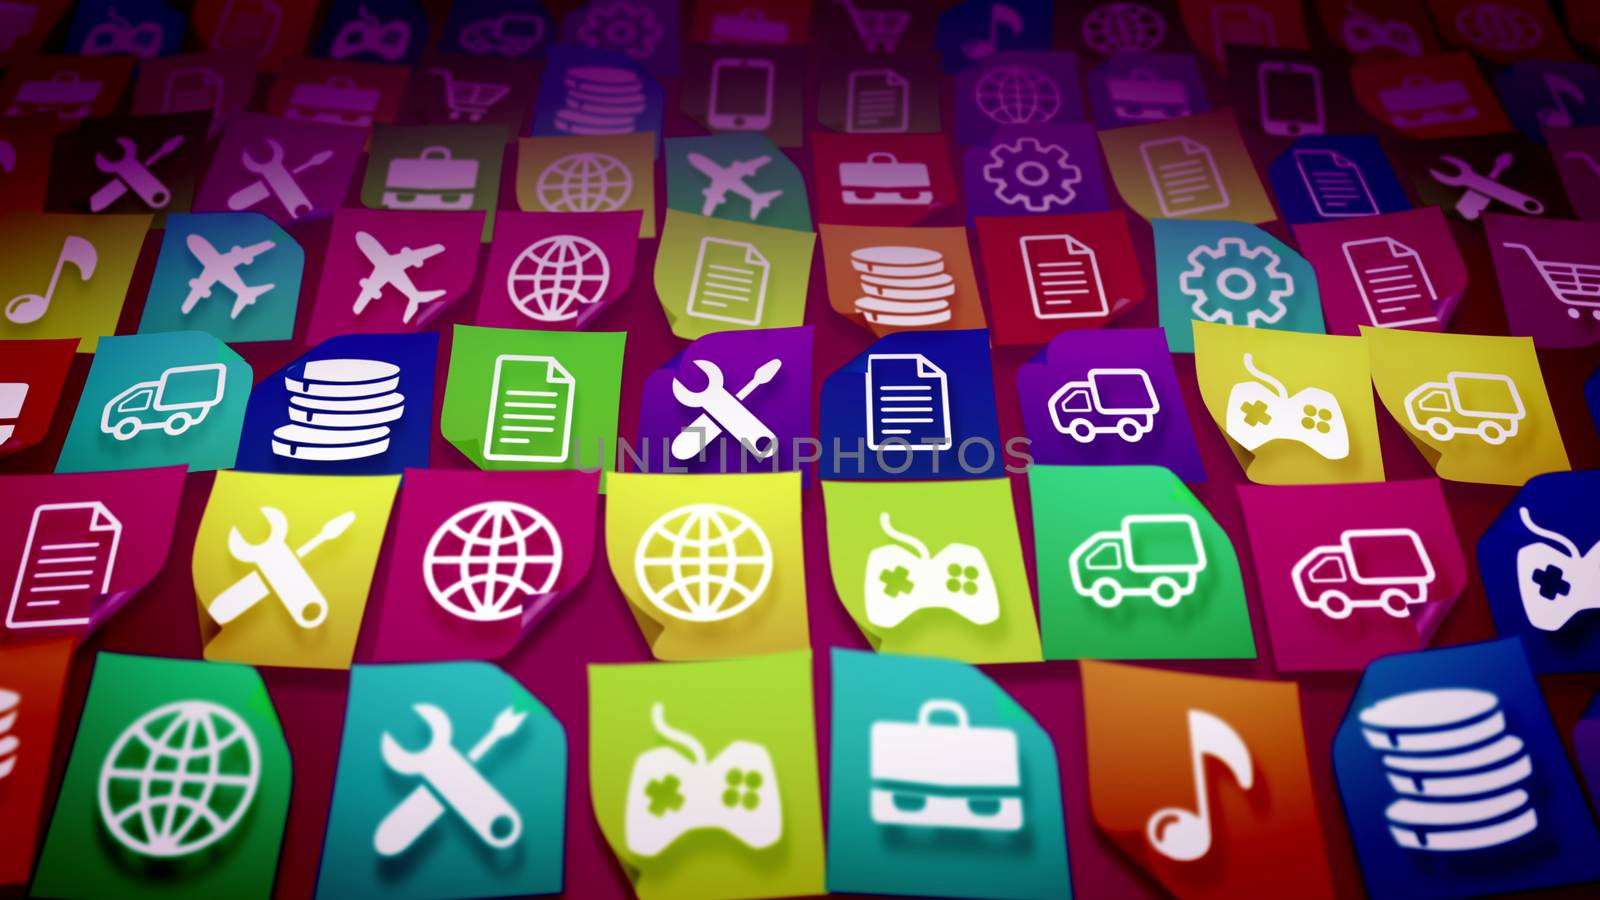 3d illustration of mobile application icons with the images of a cell phone, truck, gear, music note, airplane, text, portfolio, basket, tools, world and so on, presented awry in the background